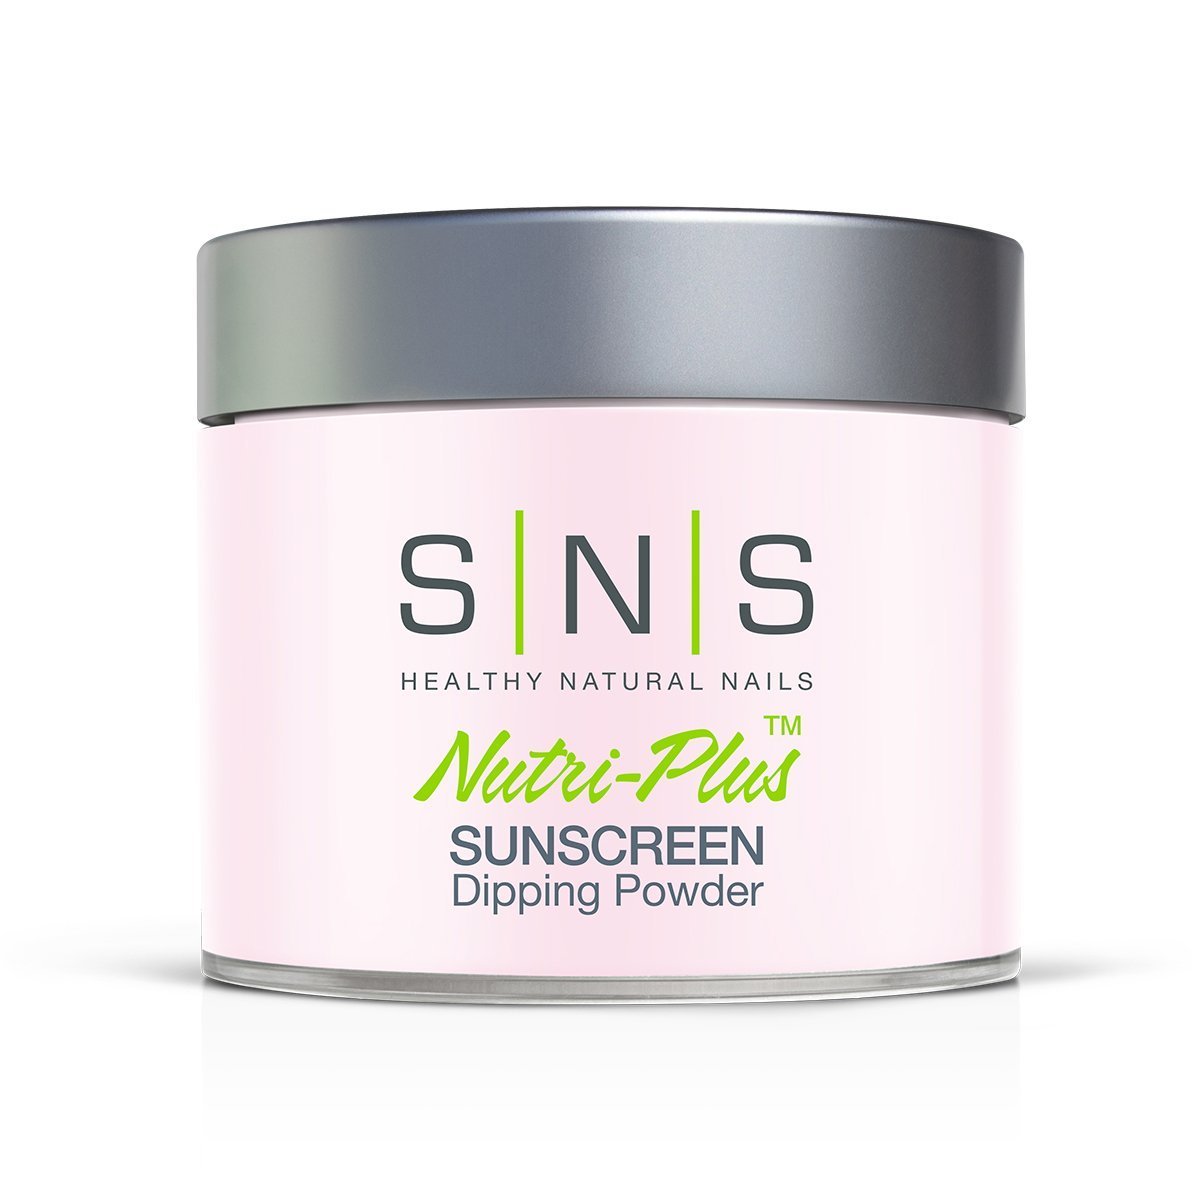 SNS Sunscreen Dipping Power Pink & White - 2oz